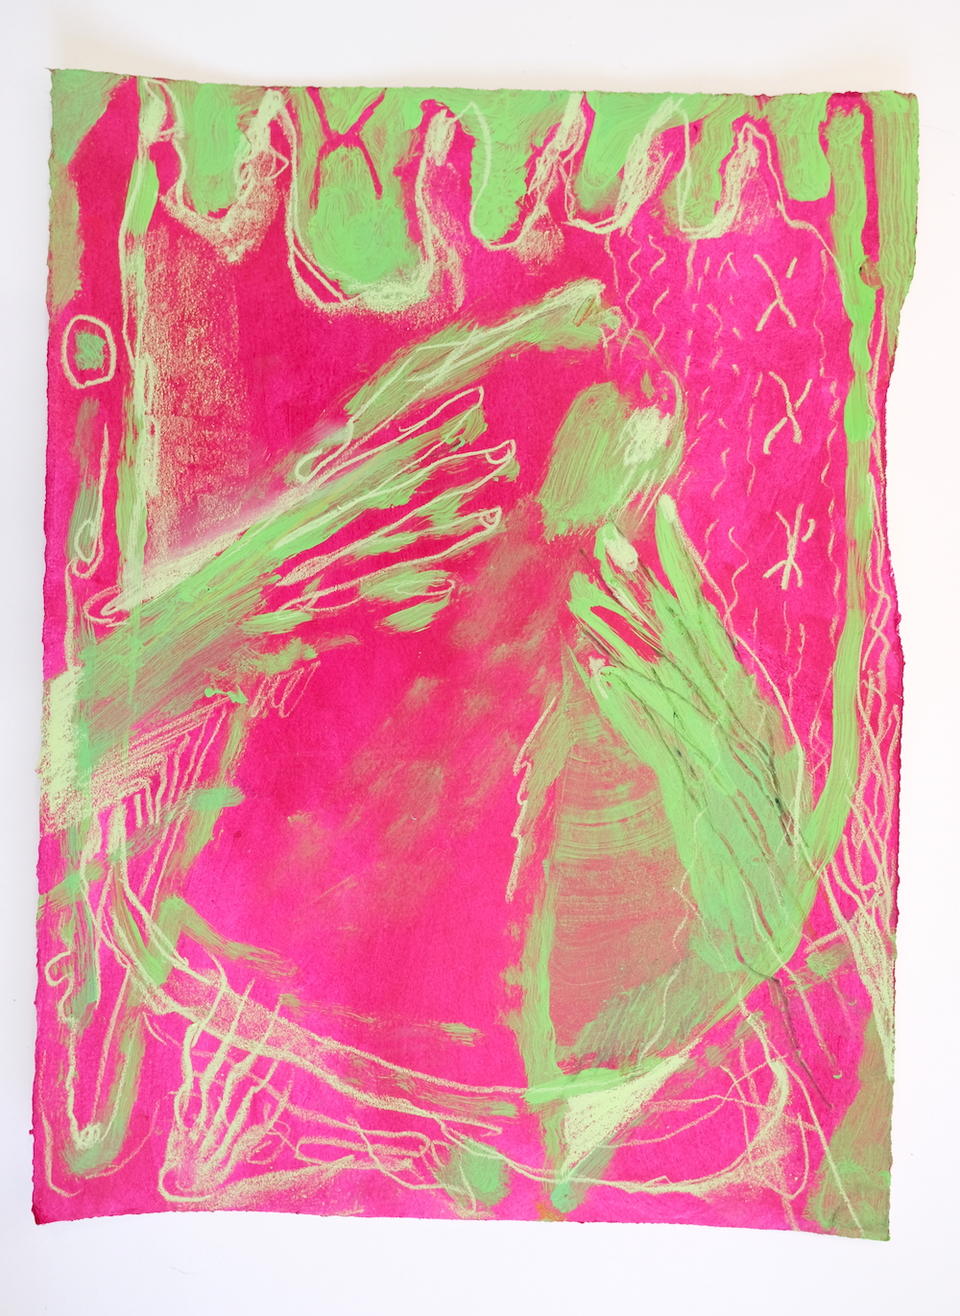 Photo of pink and green drawing with hands clutching an upturned face